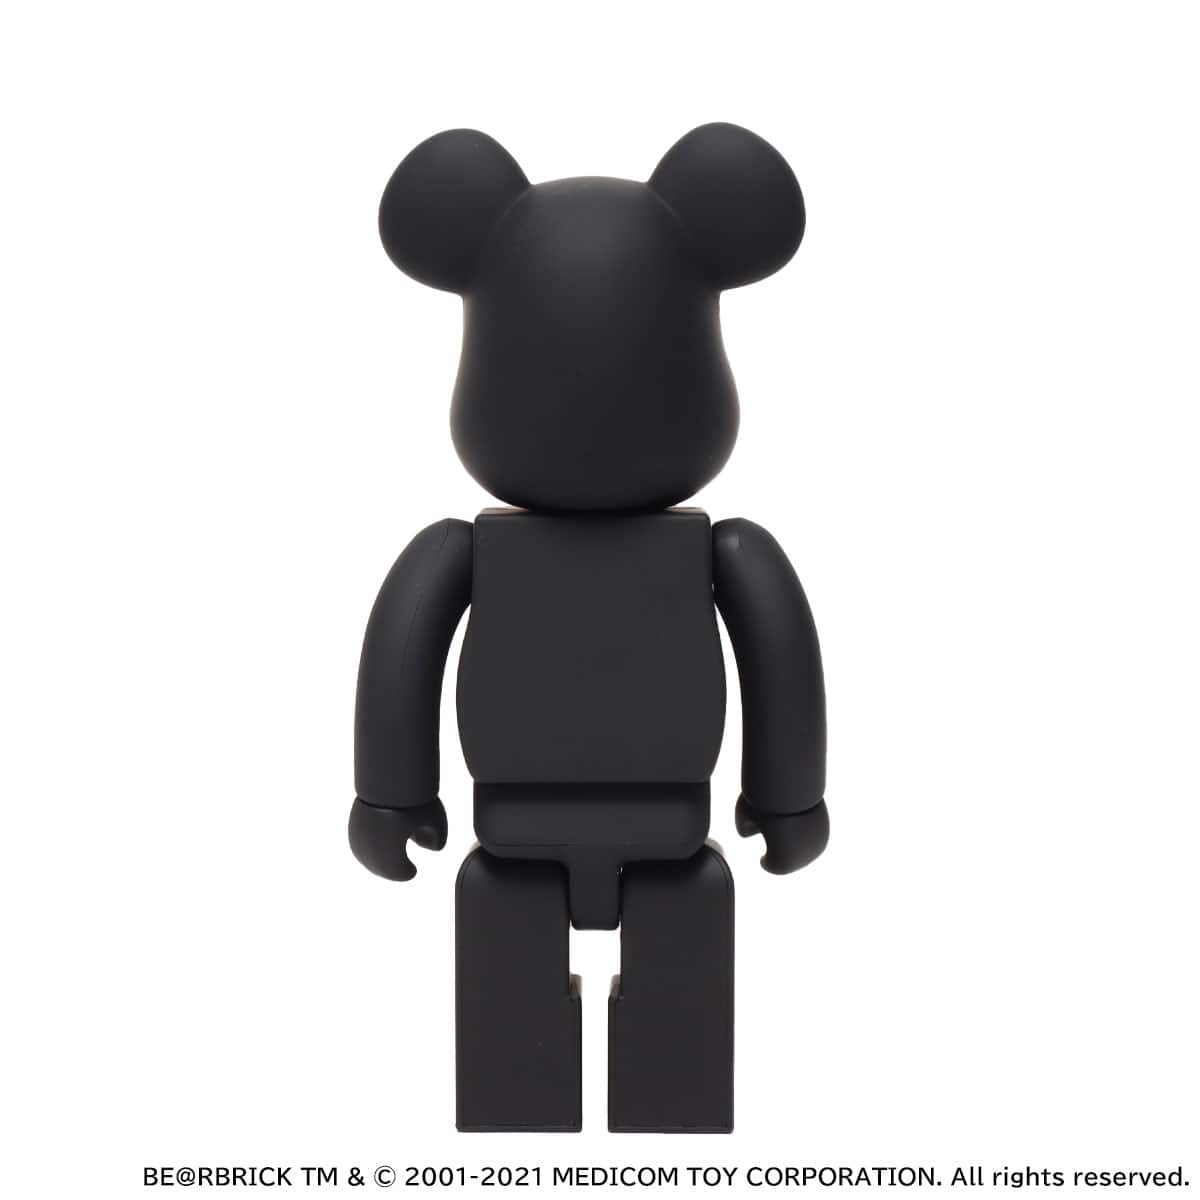 BE@RBRICK atmos x WIND AND SEA 100% & 400% 21SS-S